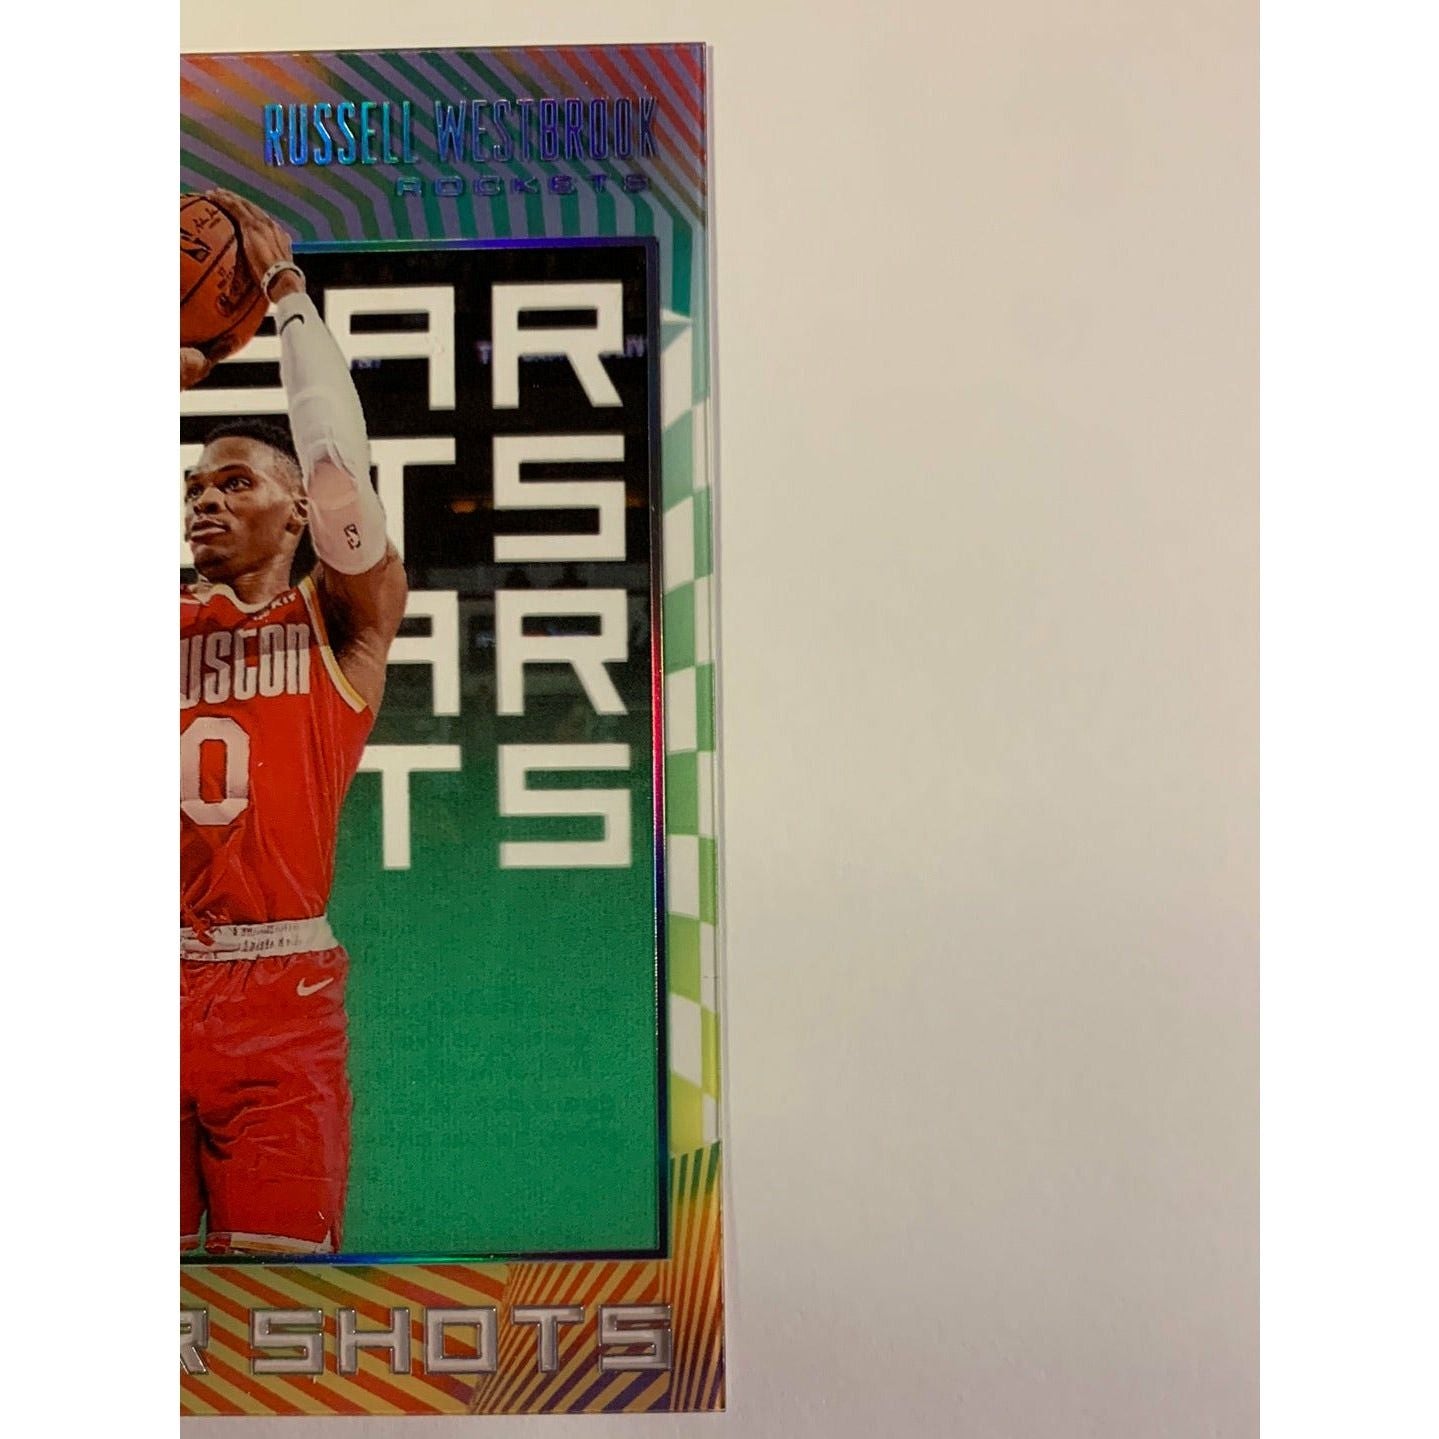  2019-20 Illusions Russel Westbrook Clear Shots  Local Legends Cards & Collectibles